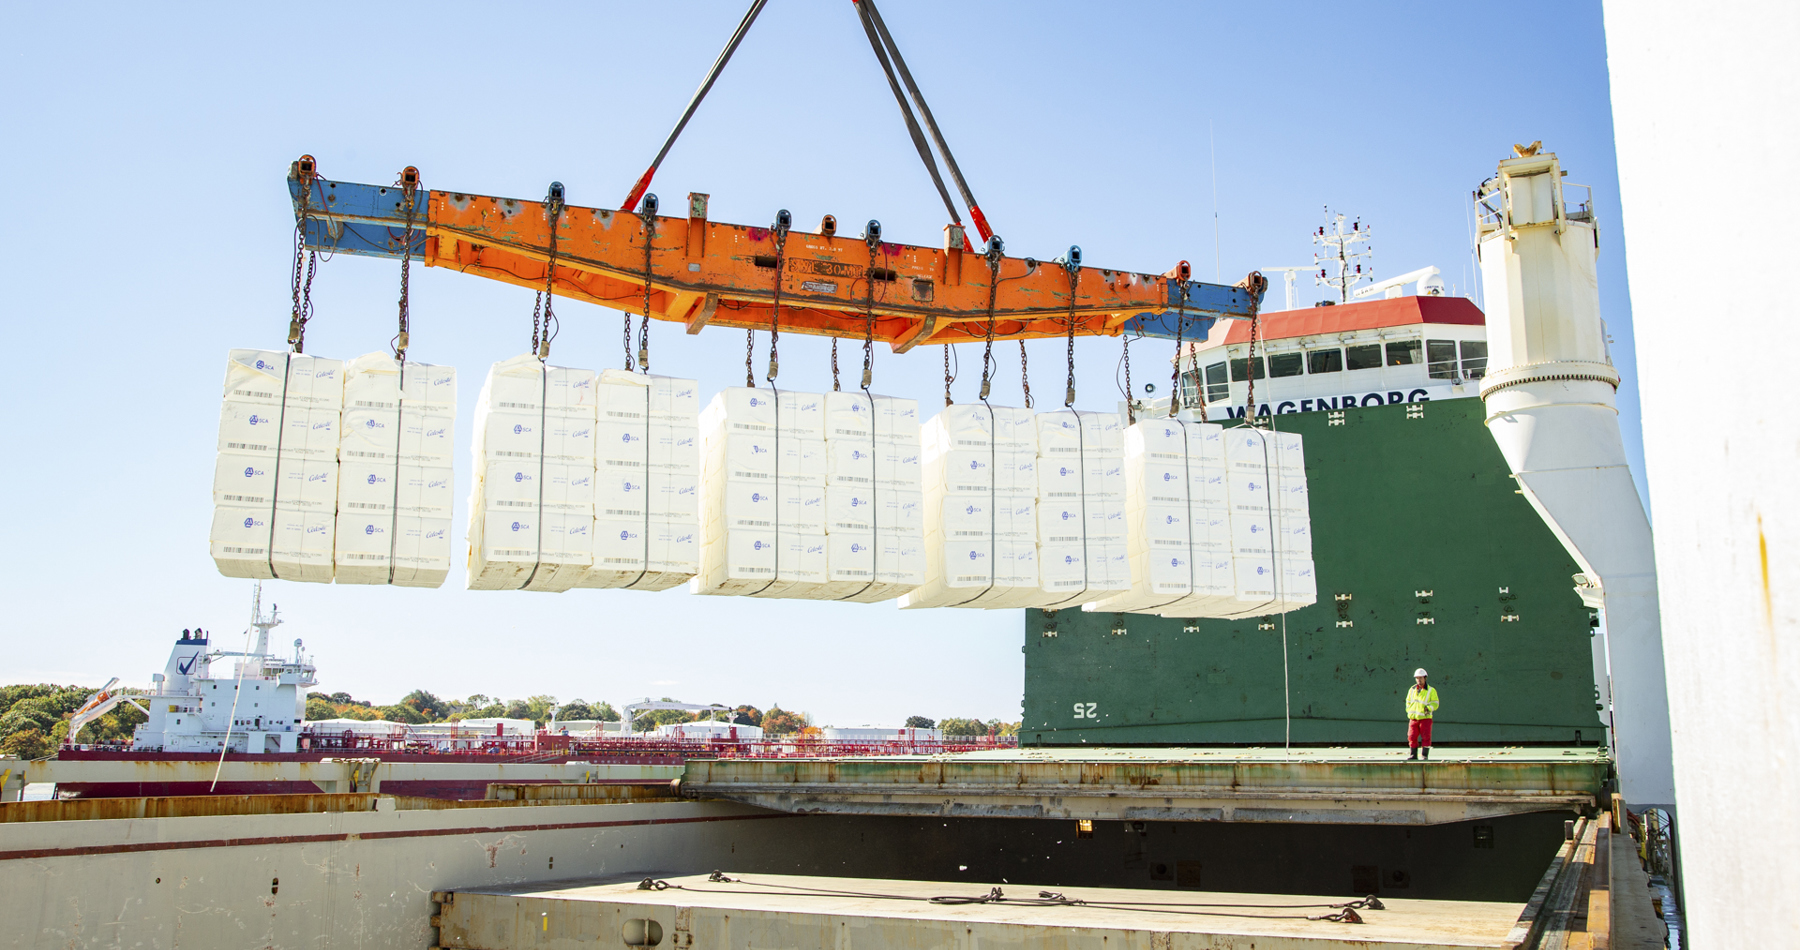 Wagenborg Shipping and SCA secure contract for wood, pulp and paper trade to the US East Coast and Mediterranean